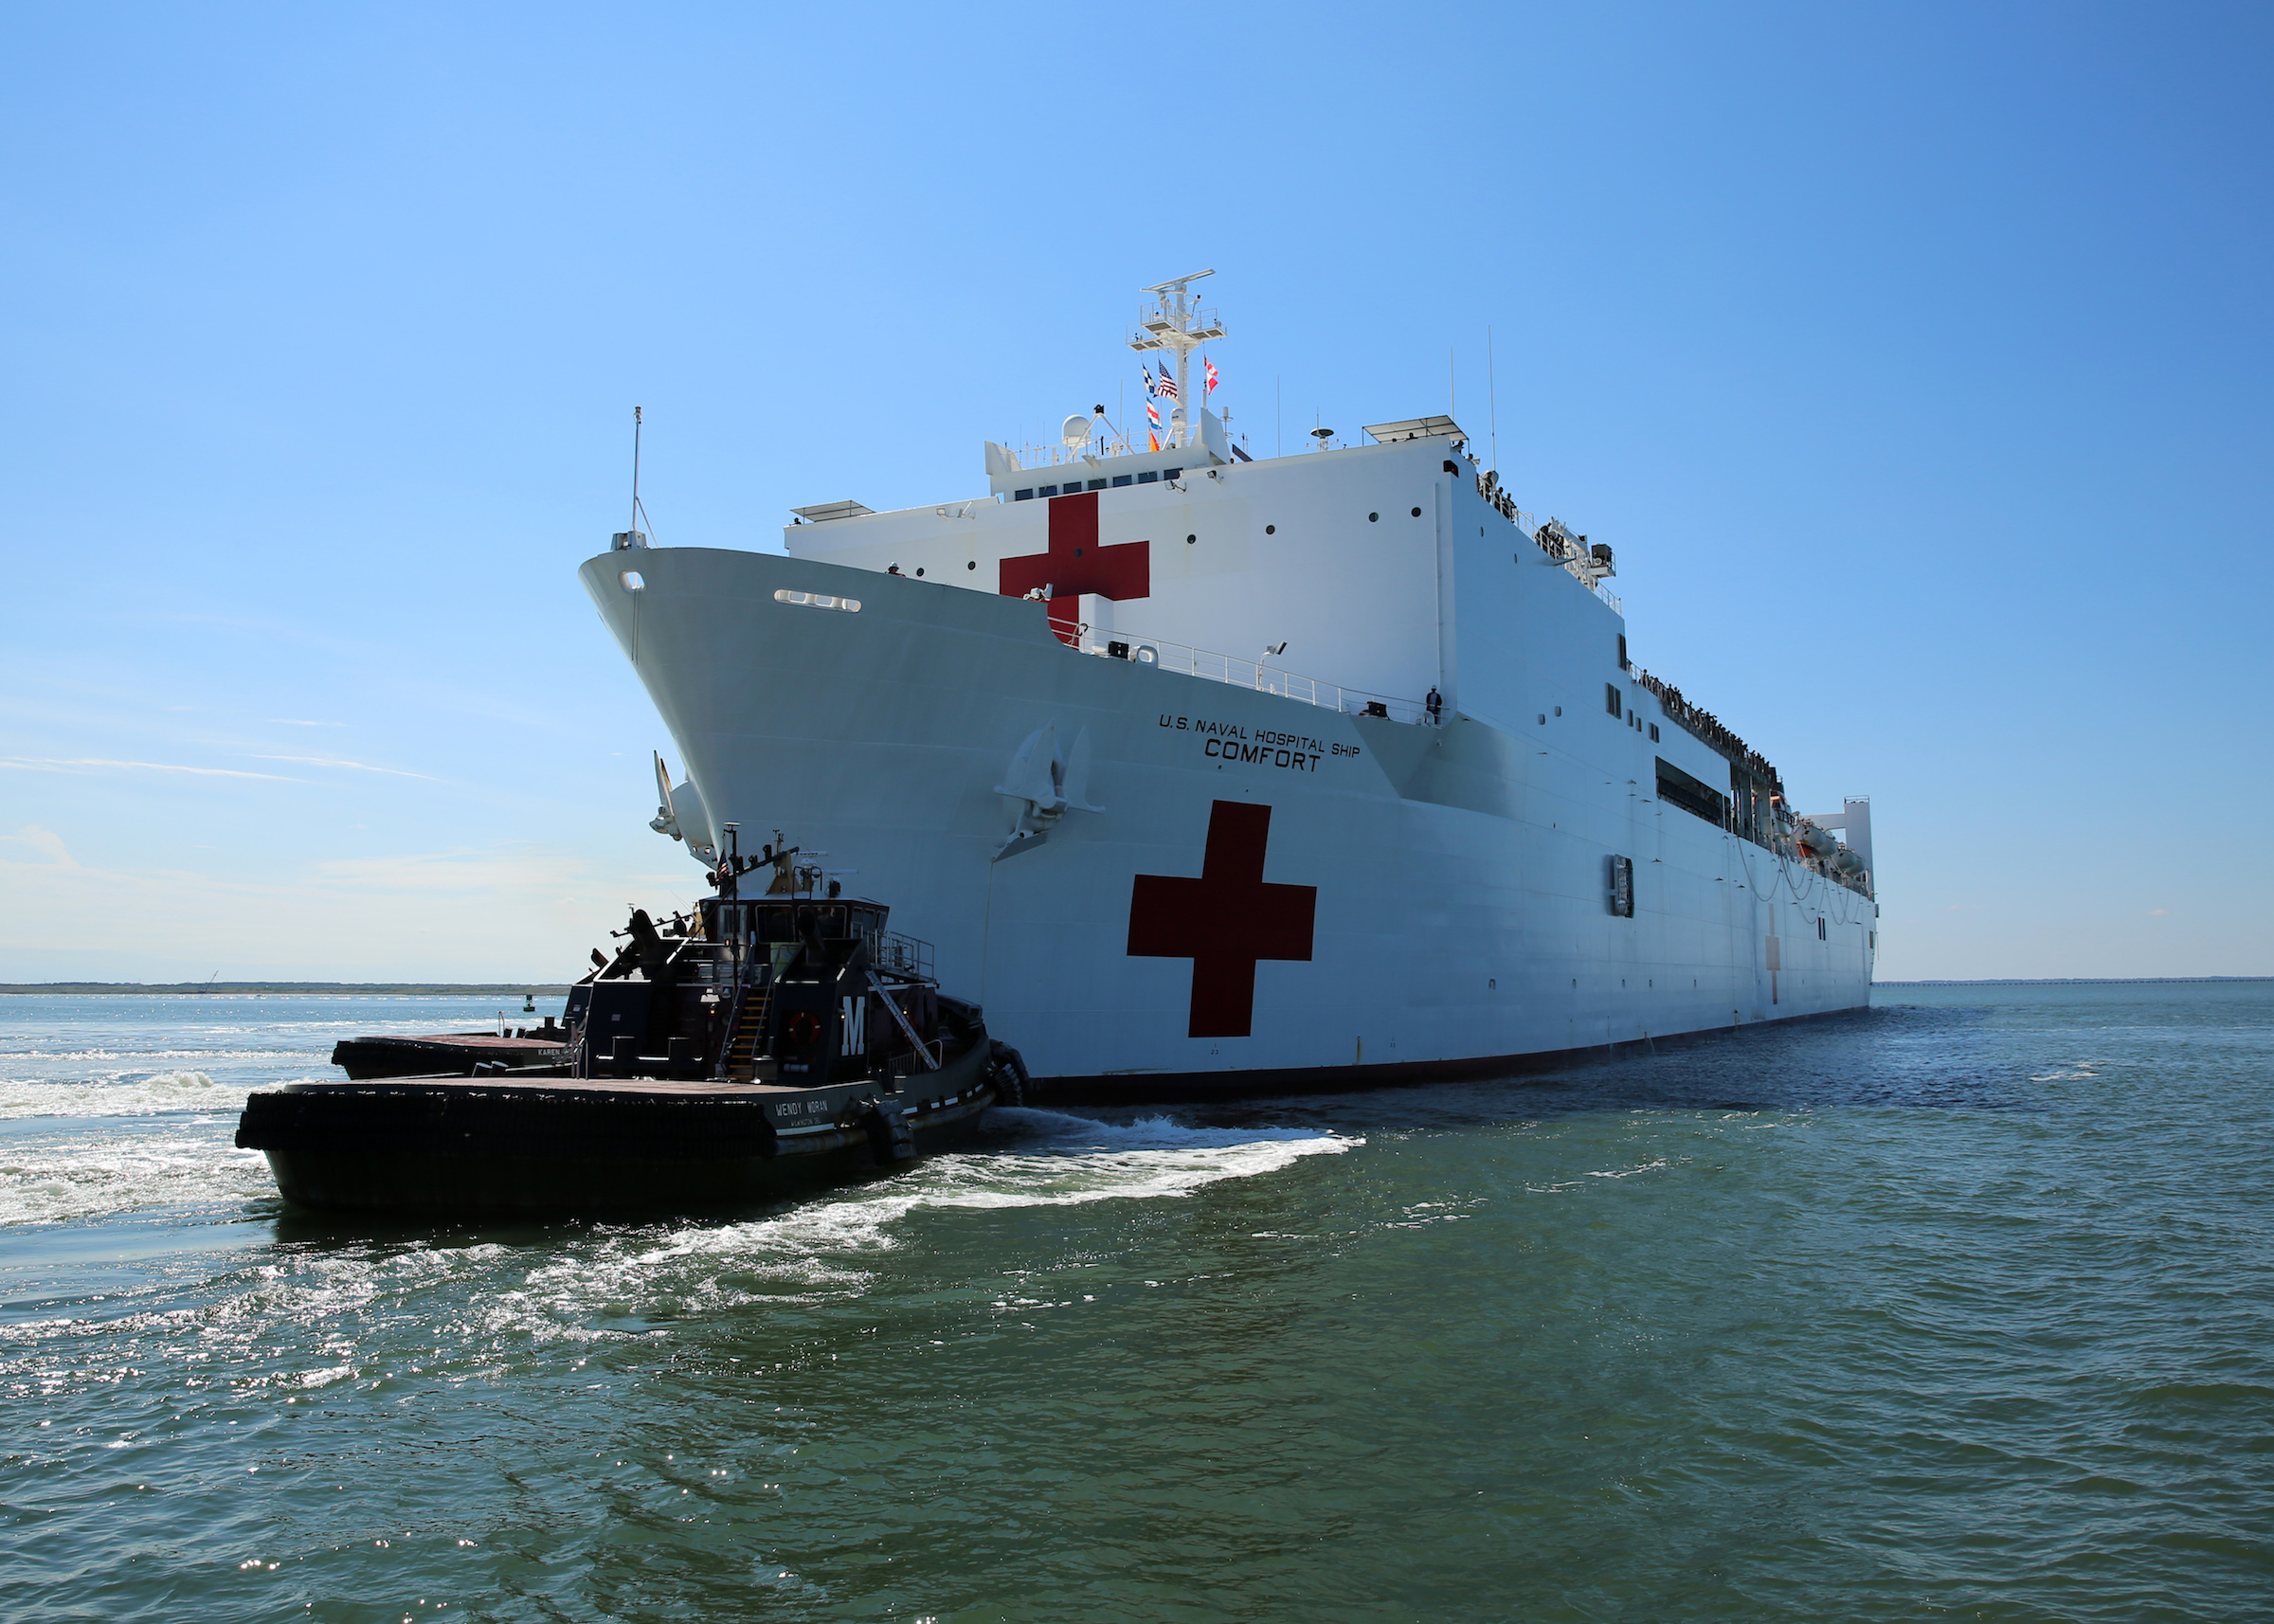 The Military Sealift Command hospital ship USNS Comfort departs Naval Station Norfolk to support hurricane relief efforts in Puerto Rico. (Bill Mesta/U.S. Navy&mdash;Getty Images)